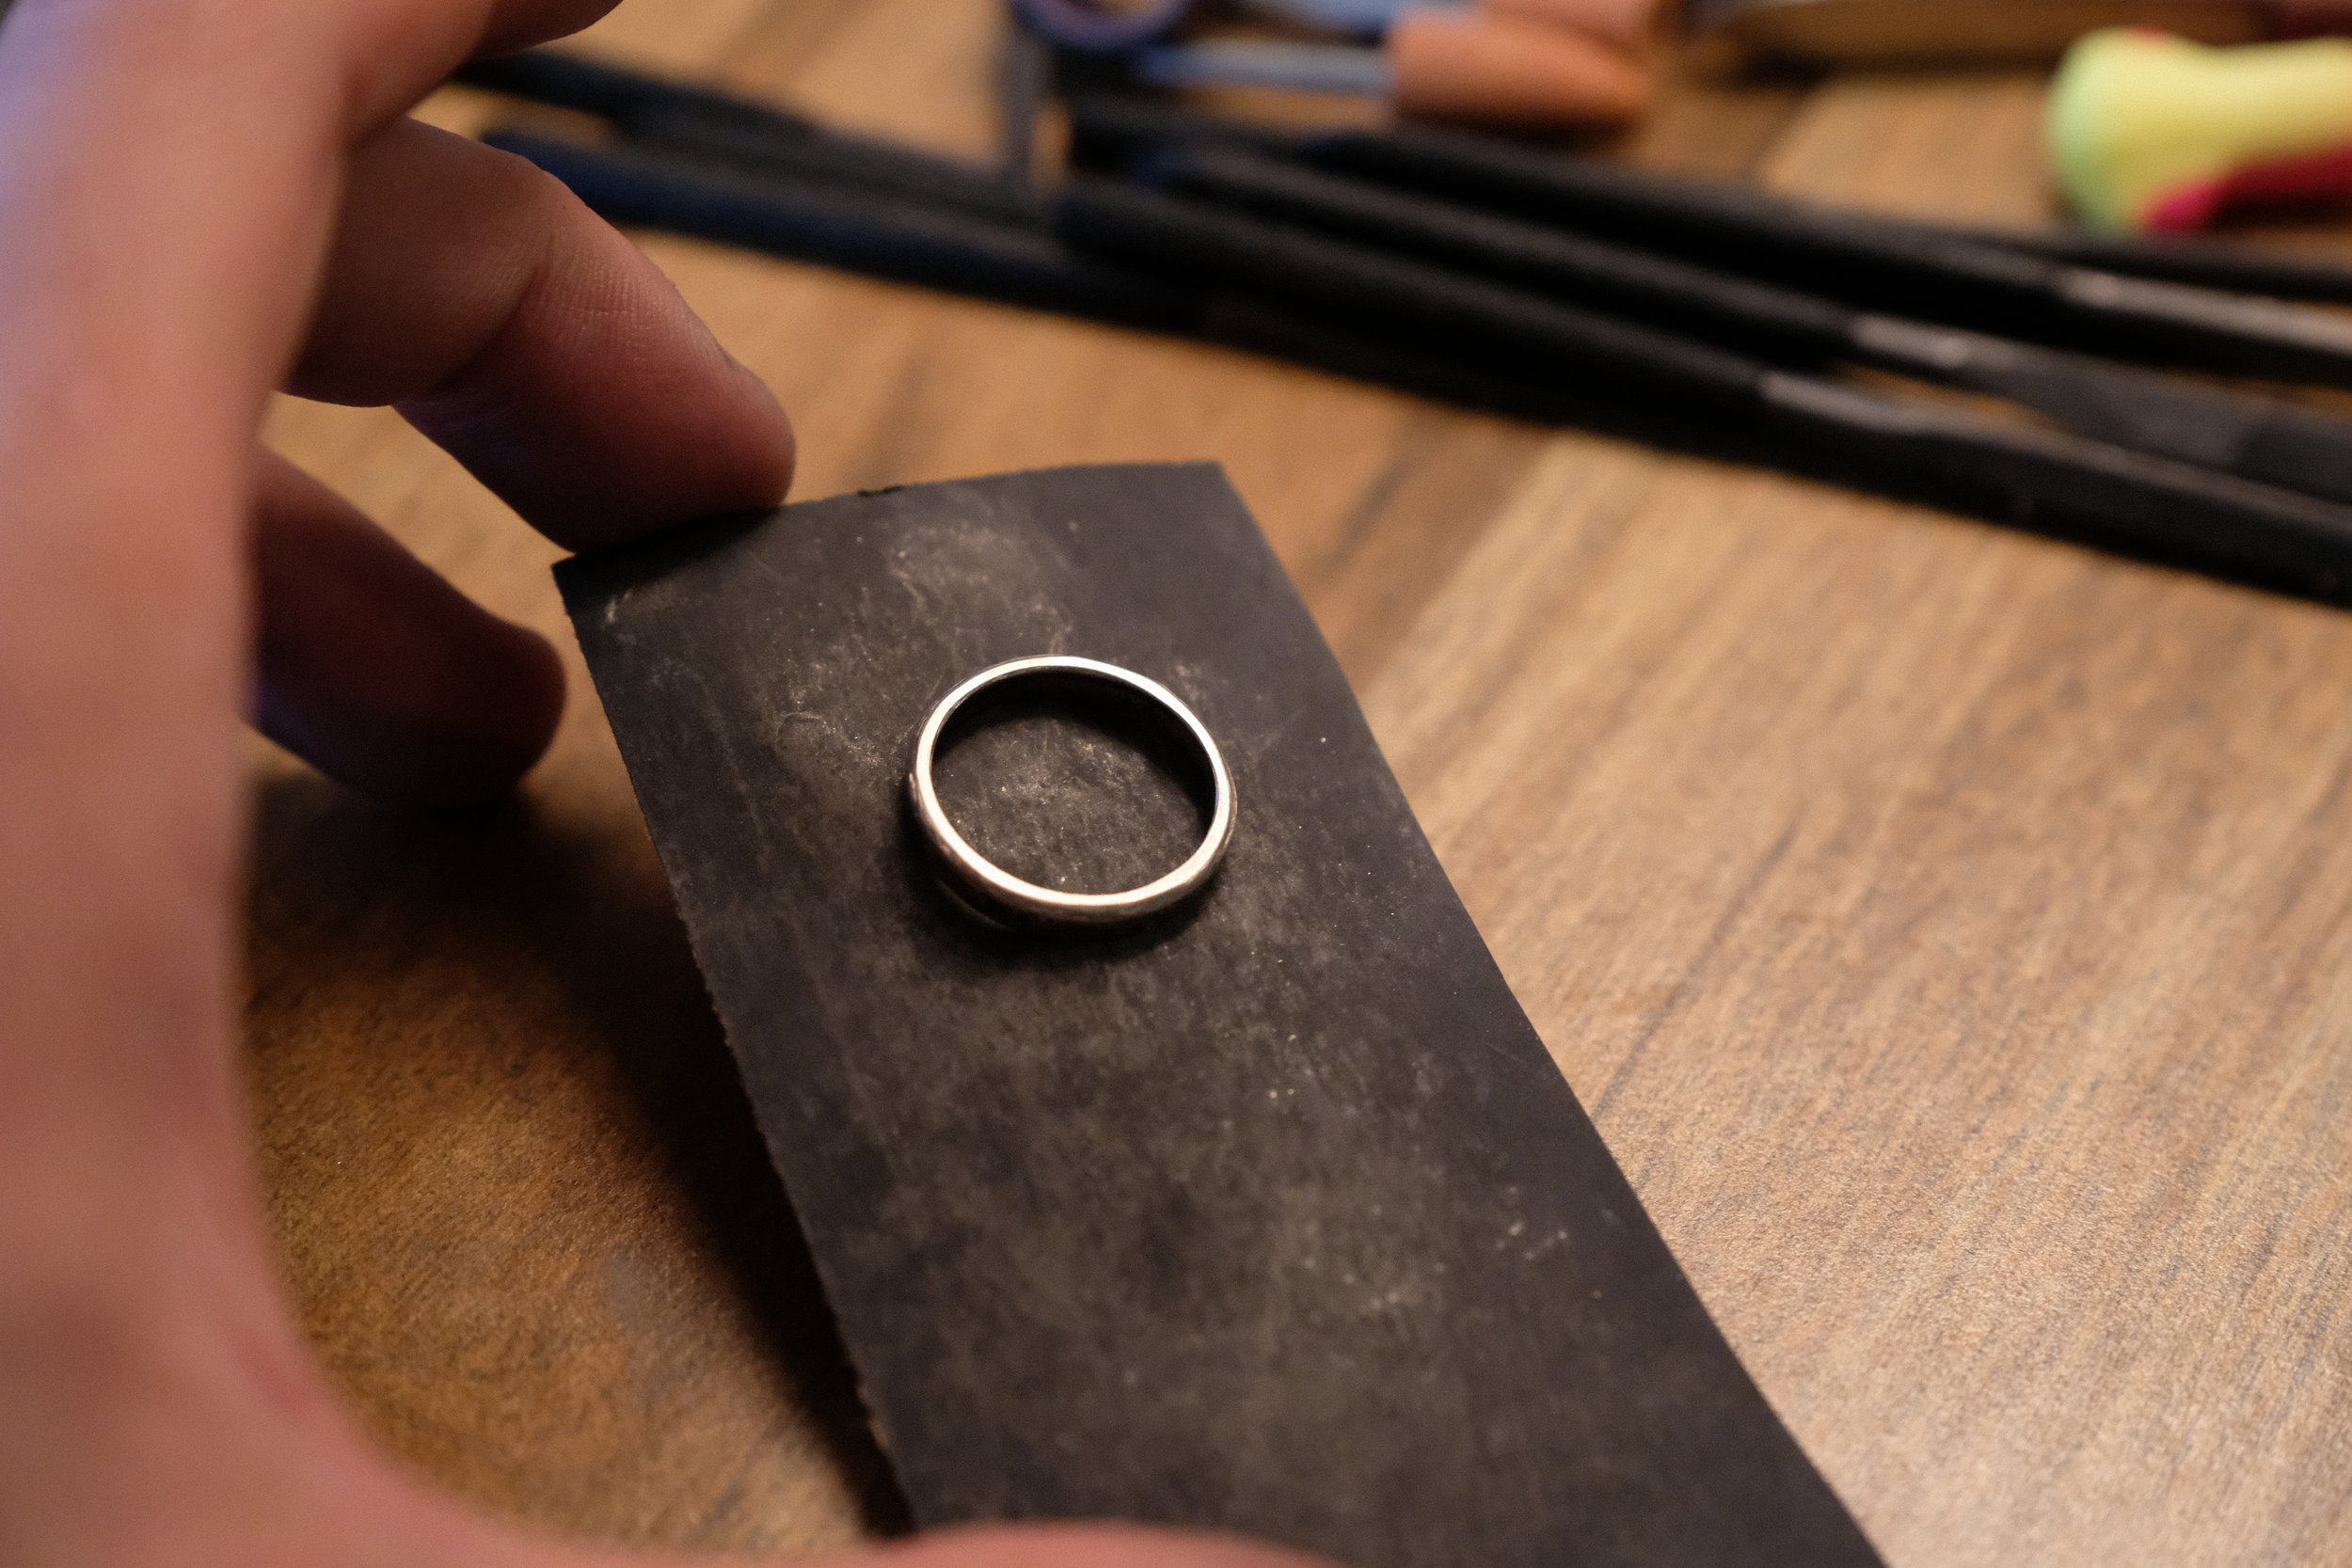  The ring is sanded with 400, 600, 800, 1000, 1200, and finally 1500 grit sandpaper. This takes off surface scratches and small imperfections.&nbsp; 